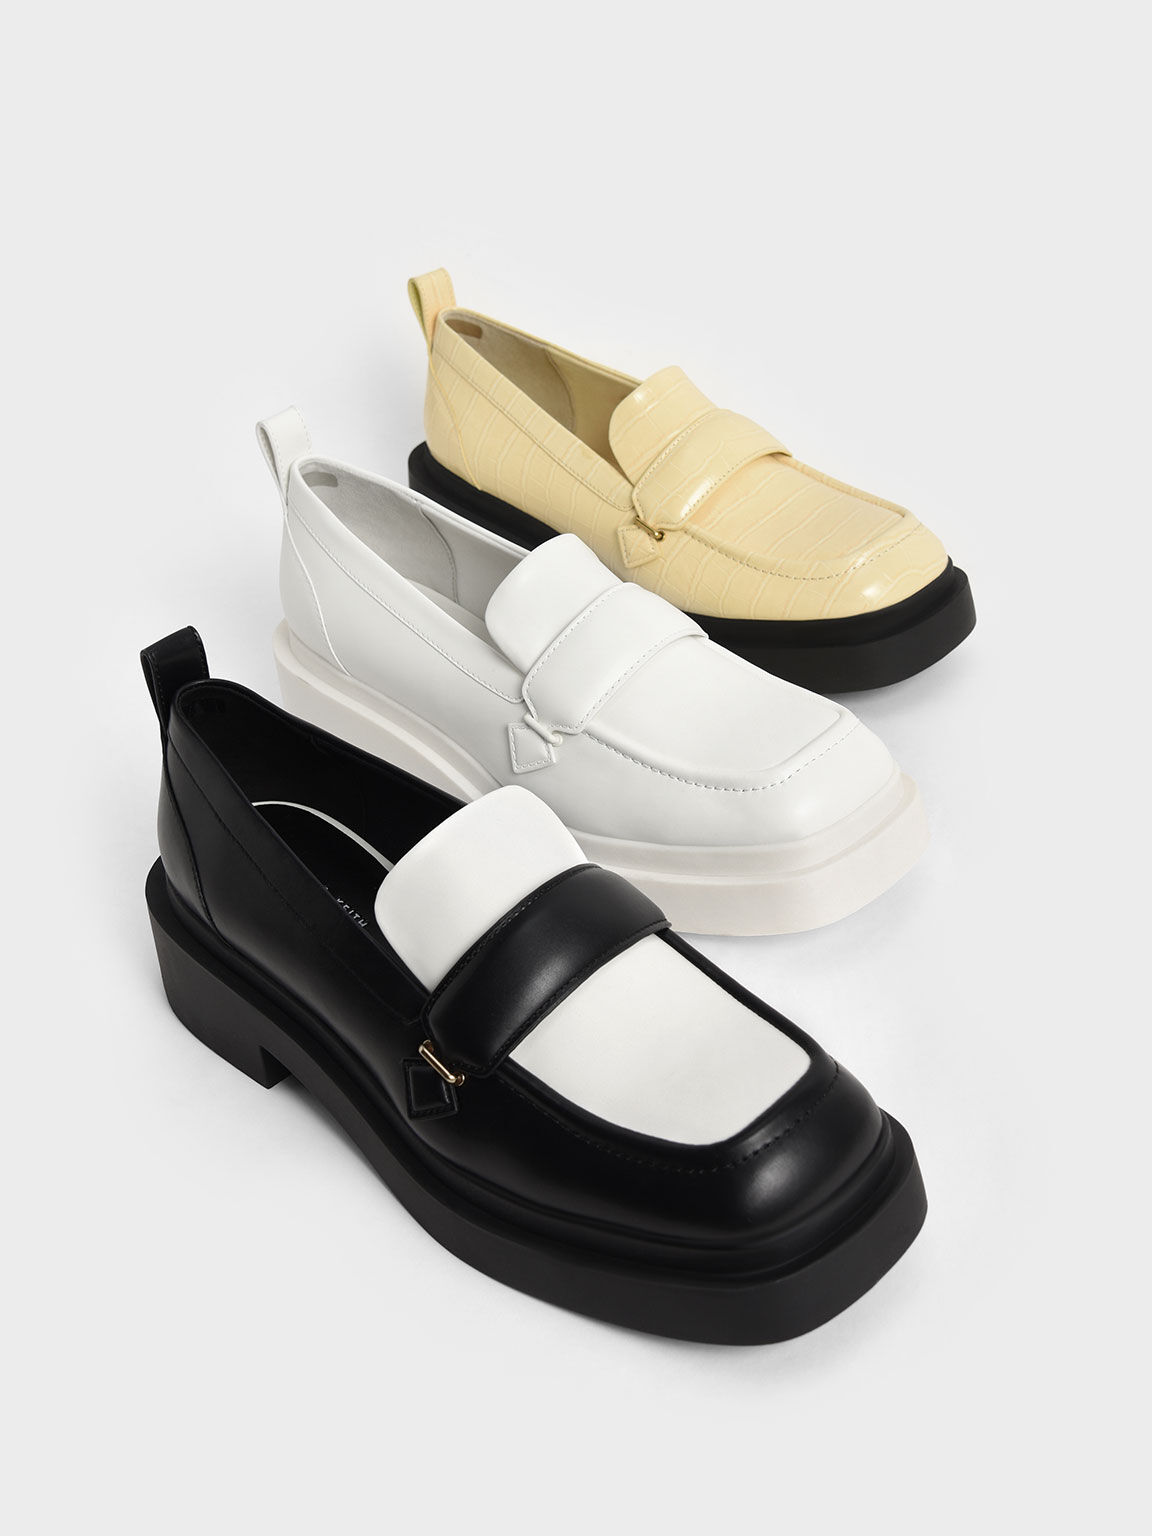 Yellow Croc-Effect Platform Penny Loafers - CHARLES & KEITH 